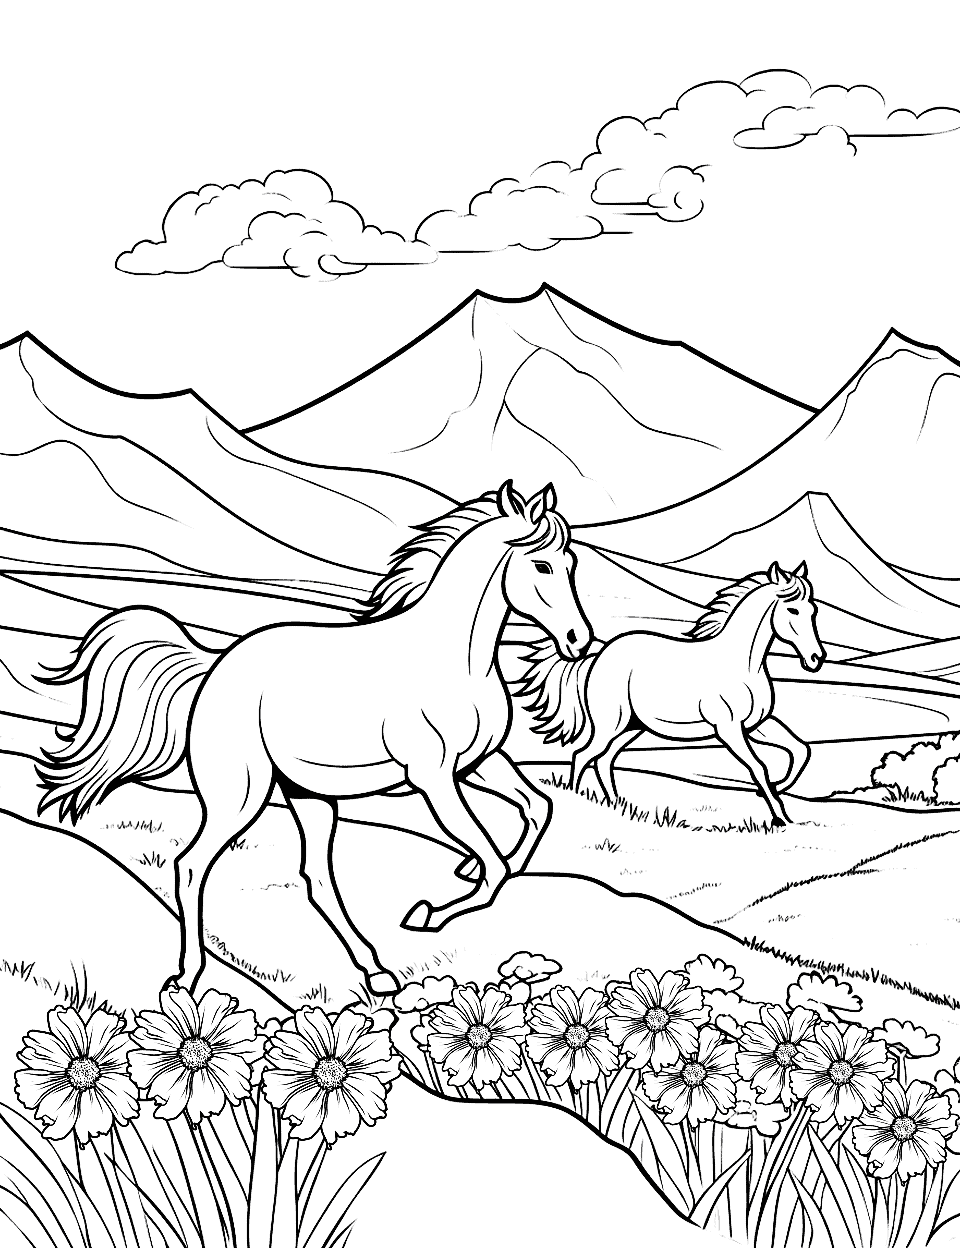 Wild Horses Running Free Nature Coloring Page - Wild horses running across a field with mountains in the distance.